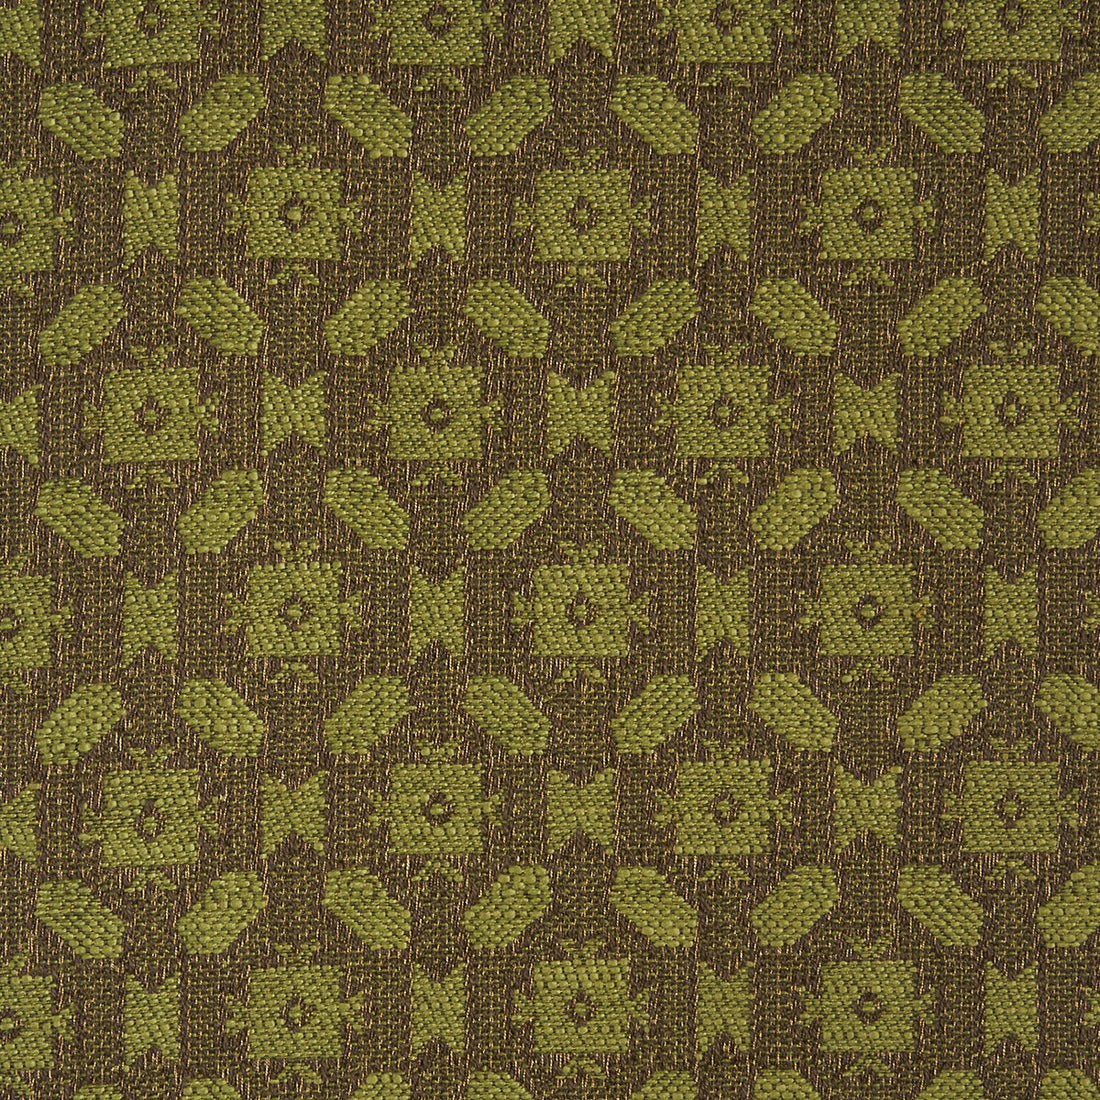 Lowell fabric in aubergine/lm color - pattern BFC-3635.103.0 - by Lee Jofa in the Blithfield collection